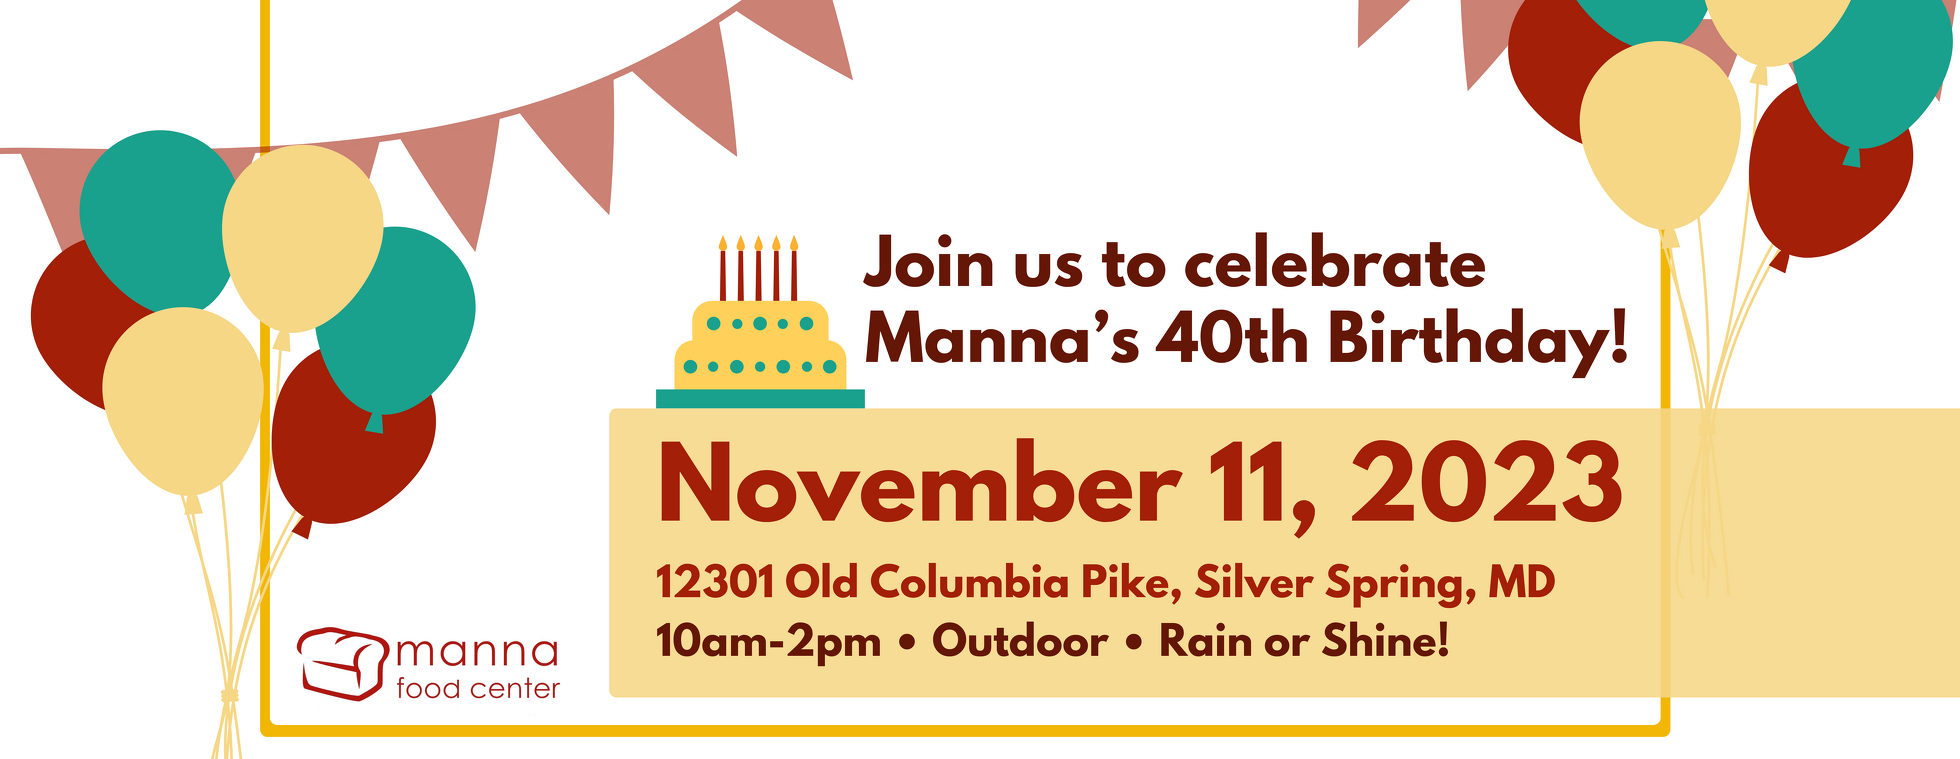 Manna Food Center's 40th Birthday Party